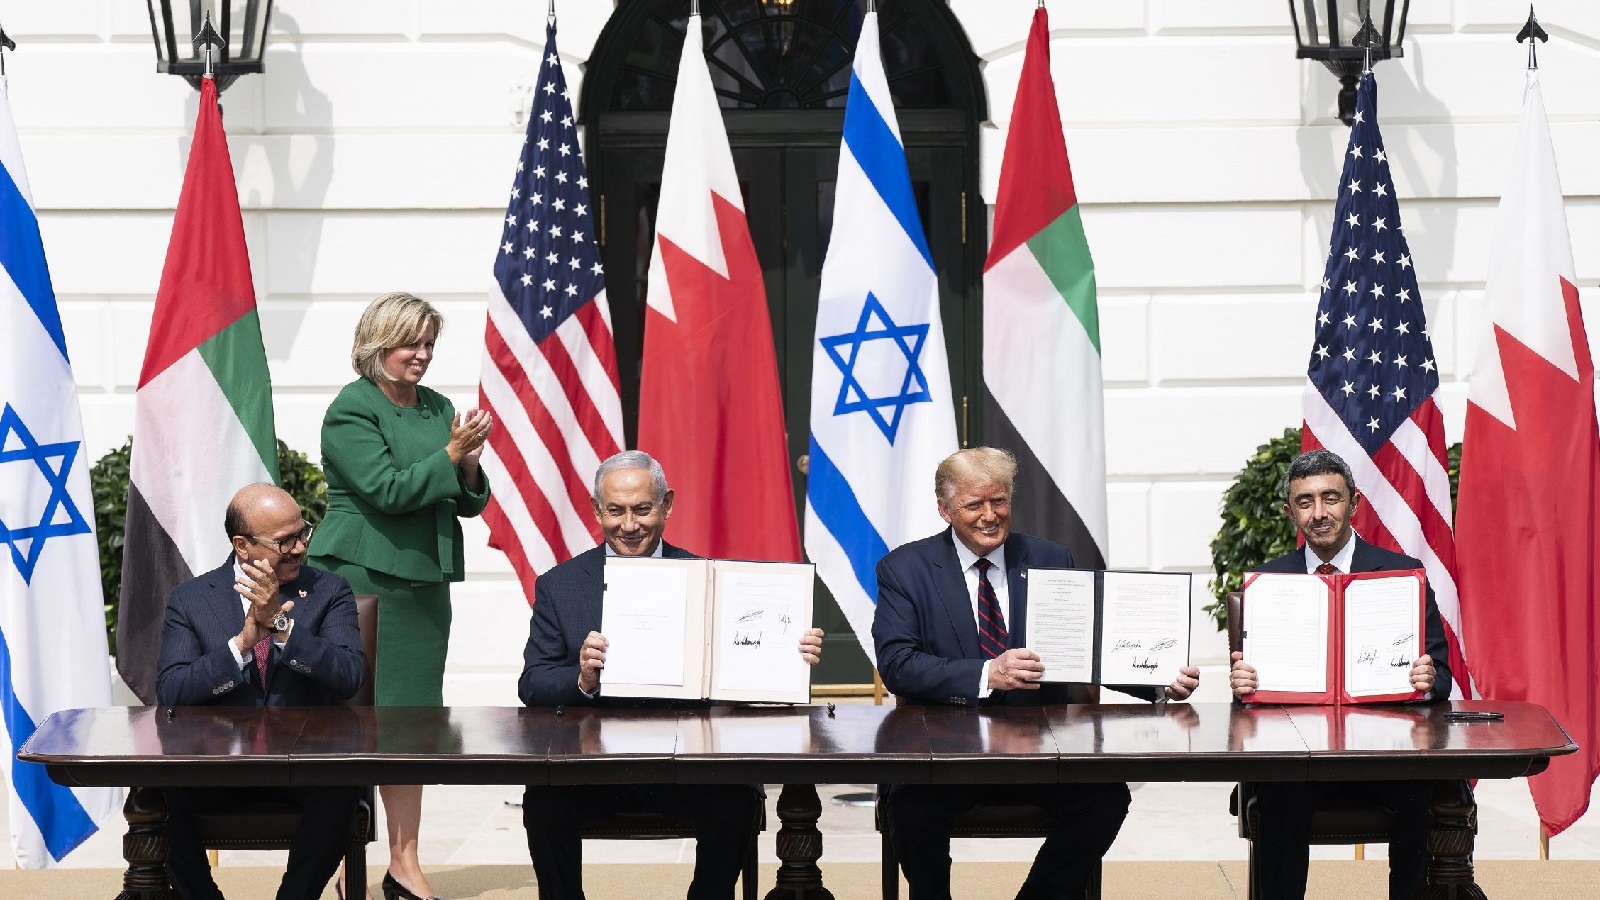 Ongoing Challenges Threaten the Abraham Accords’ Survival